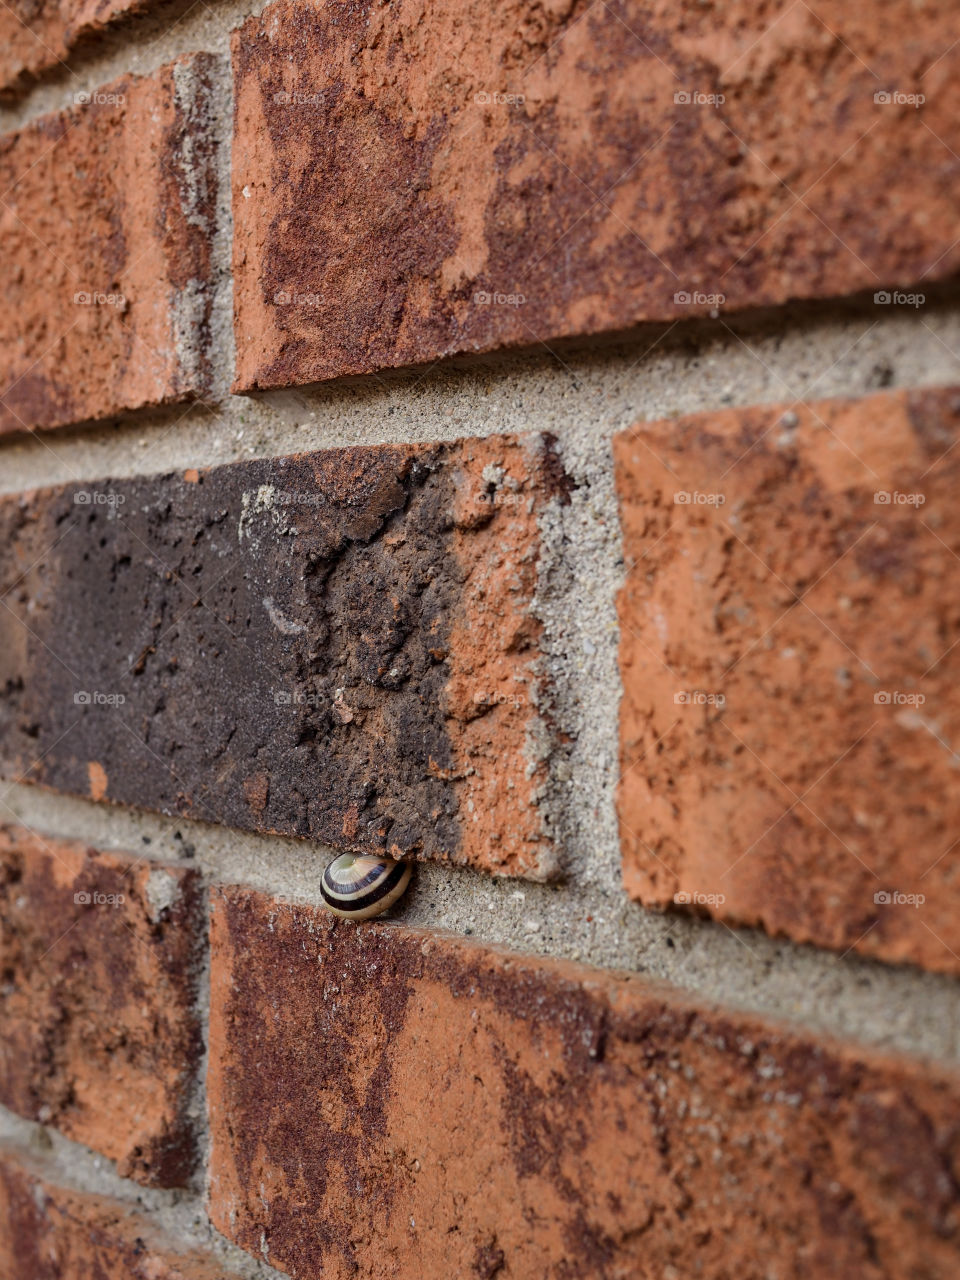 Little snail takes a rest halfway up a brick wall.